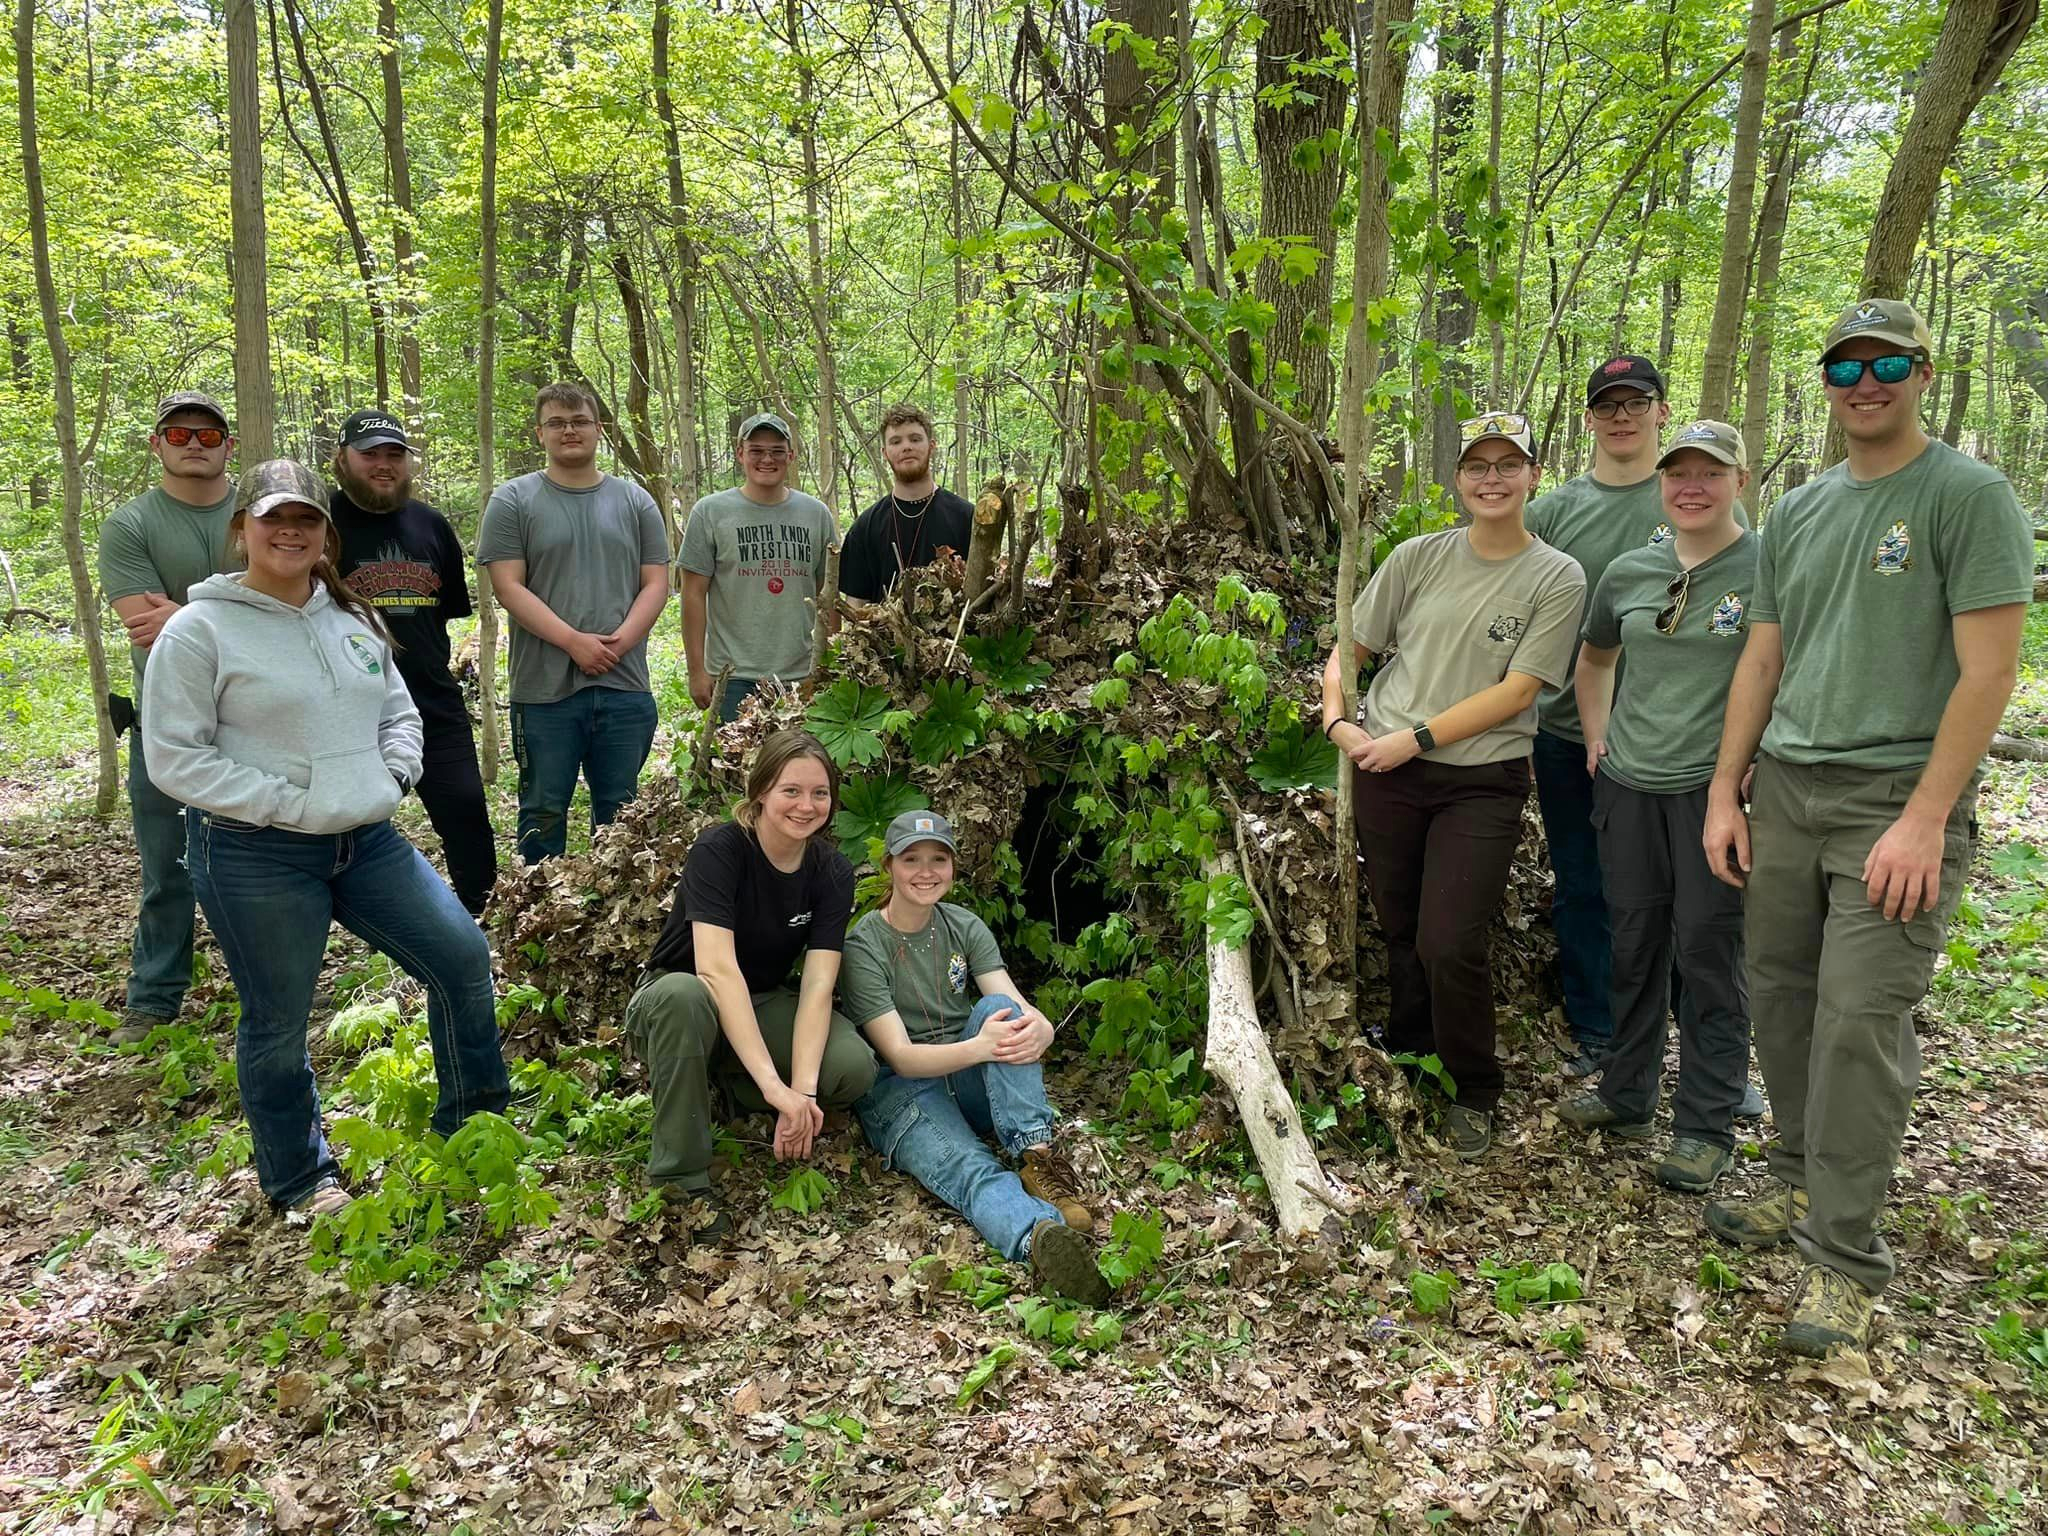 A group of Conservation Law Enforcement students stand in front of a shelter they built with natural materials